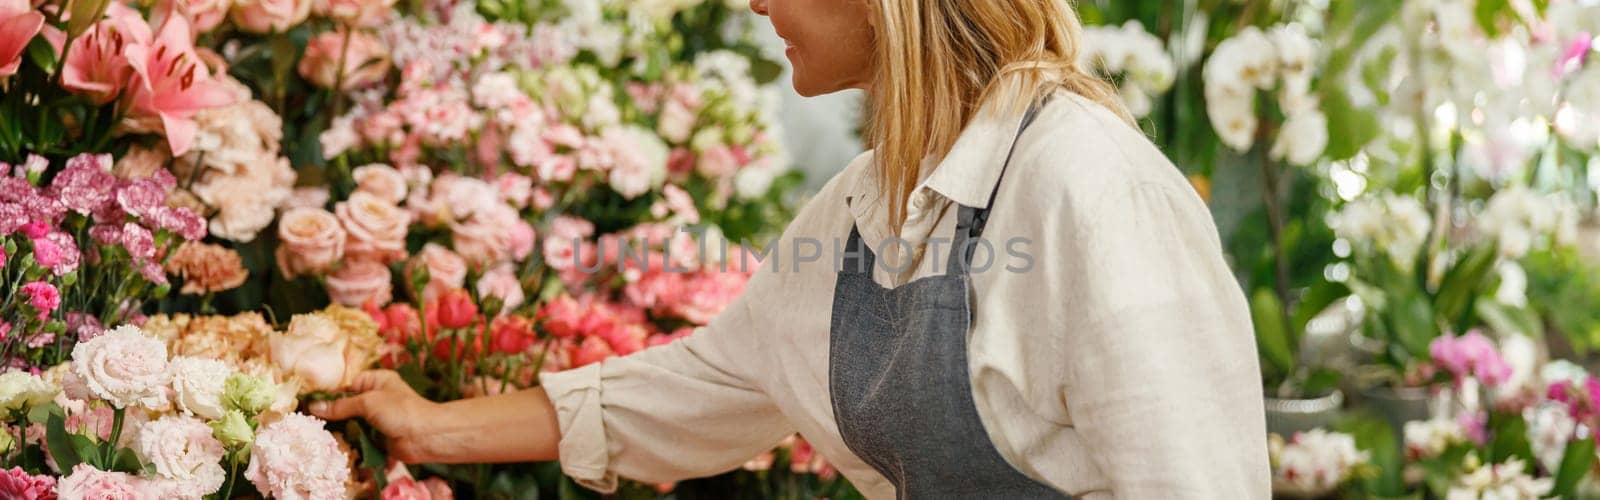 Smiling woman florist small business owner standing in own floral store and waiting for client by Yaroslav_astakhov